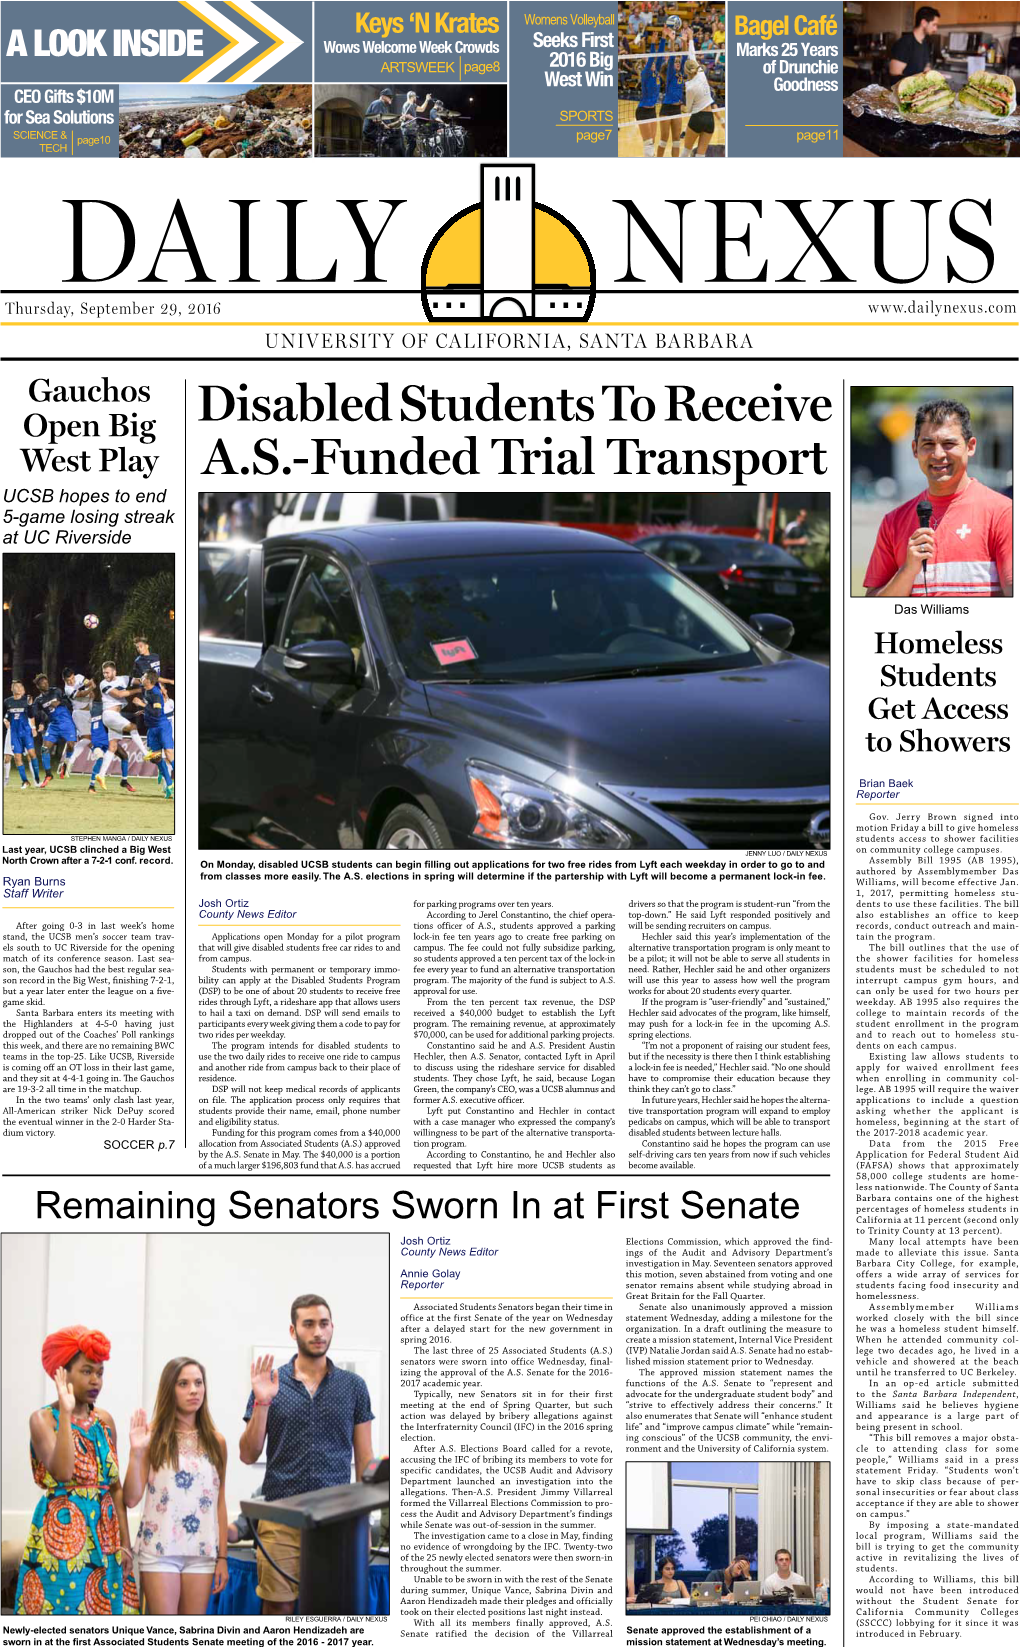 Disabled Students to Receive A.S.-Funded Trial